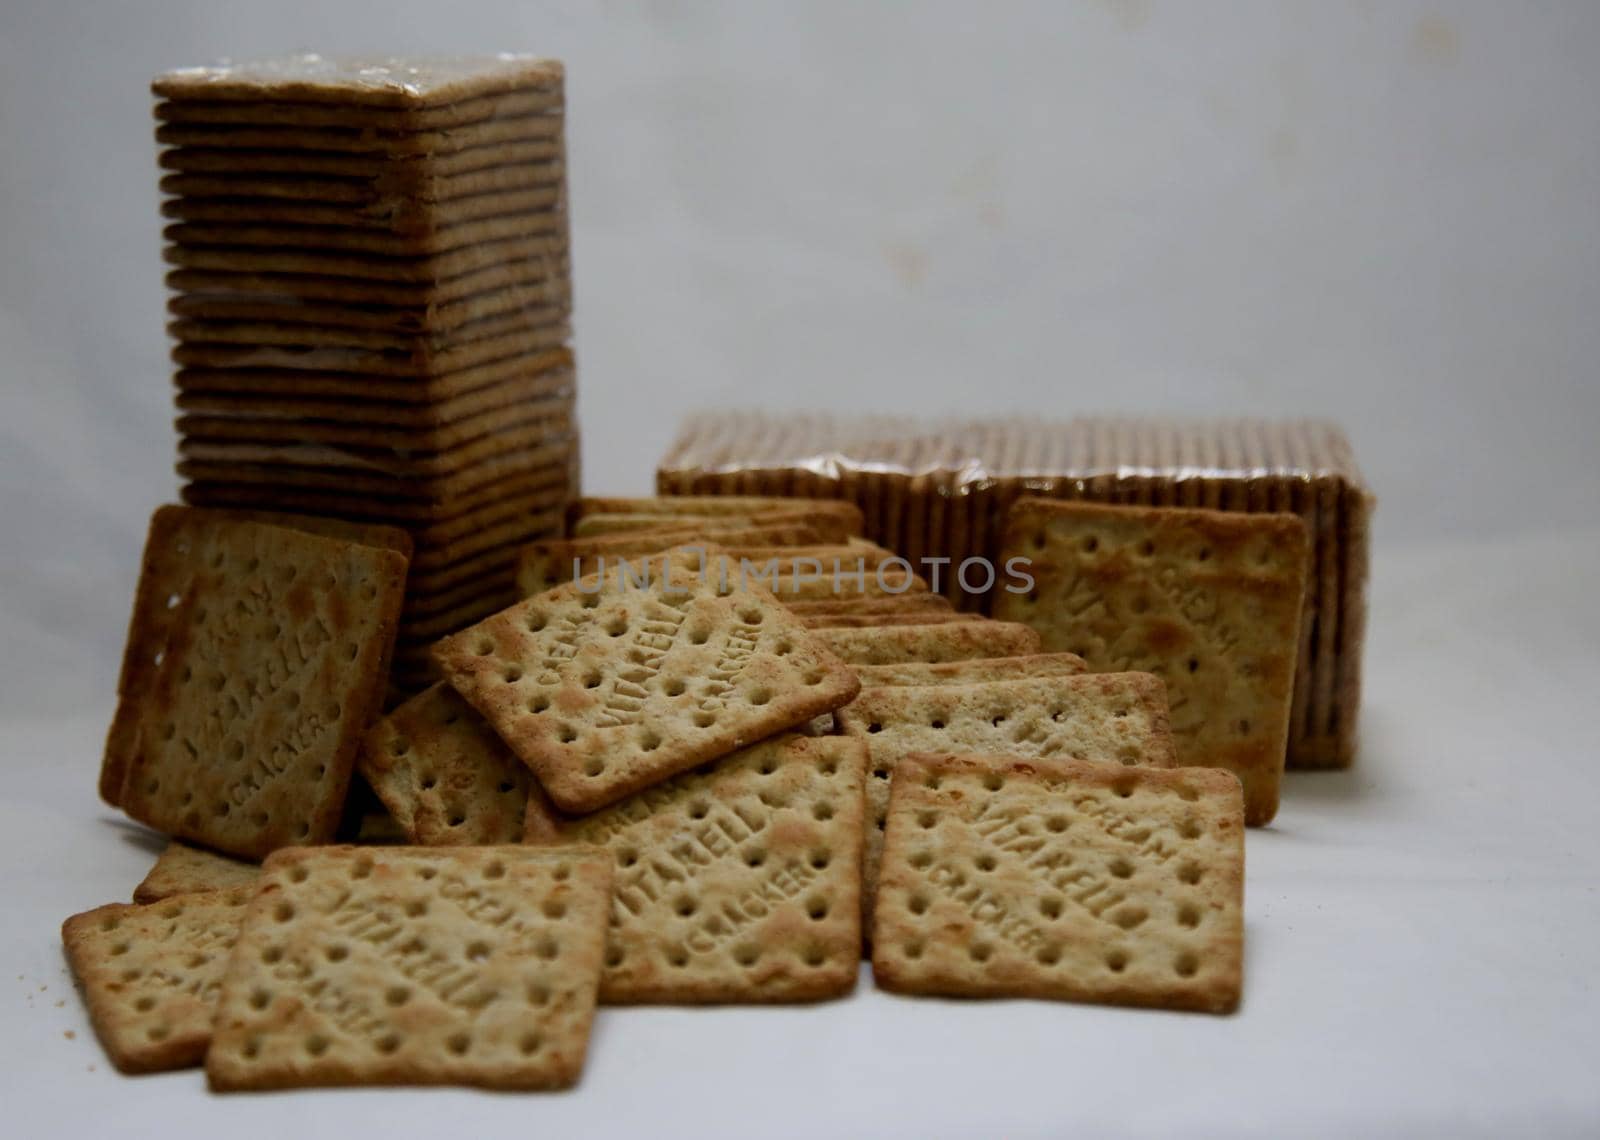 salvador, bahia / brazil - may 26, 2020: cream cracker cookies are seen outside the package.